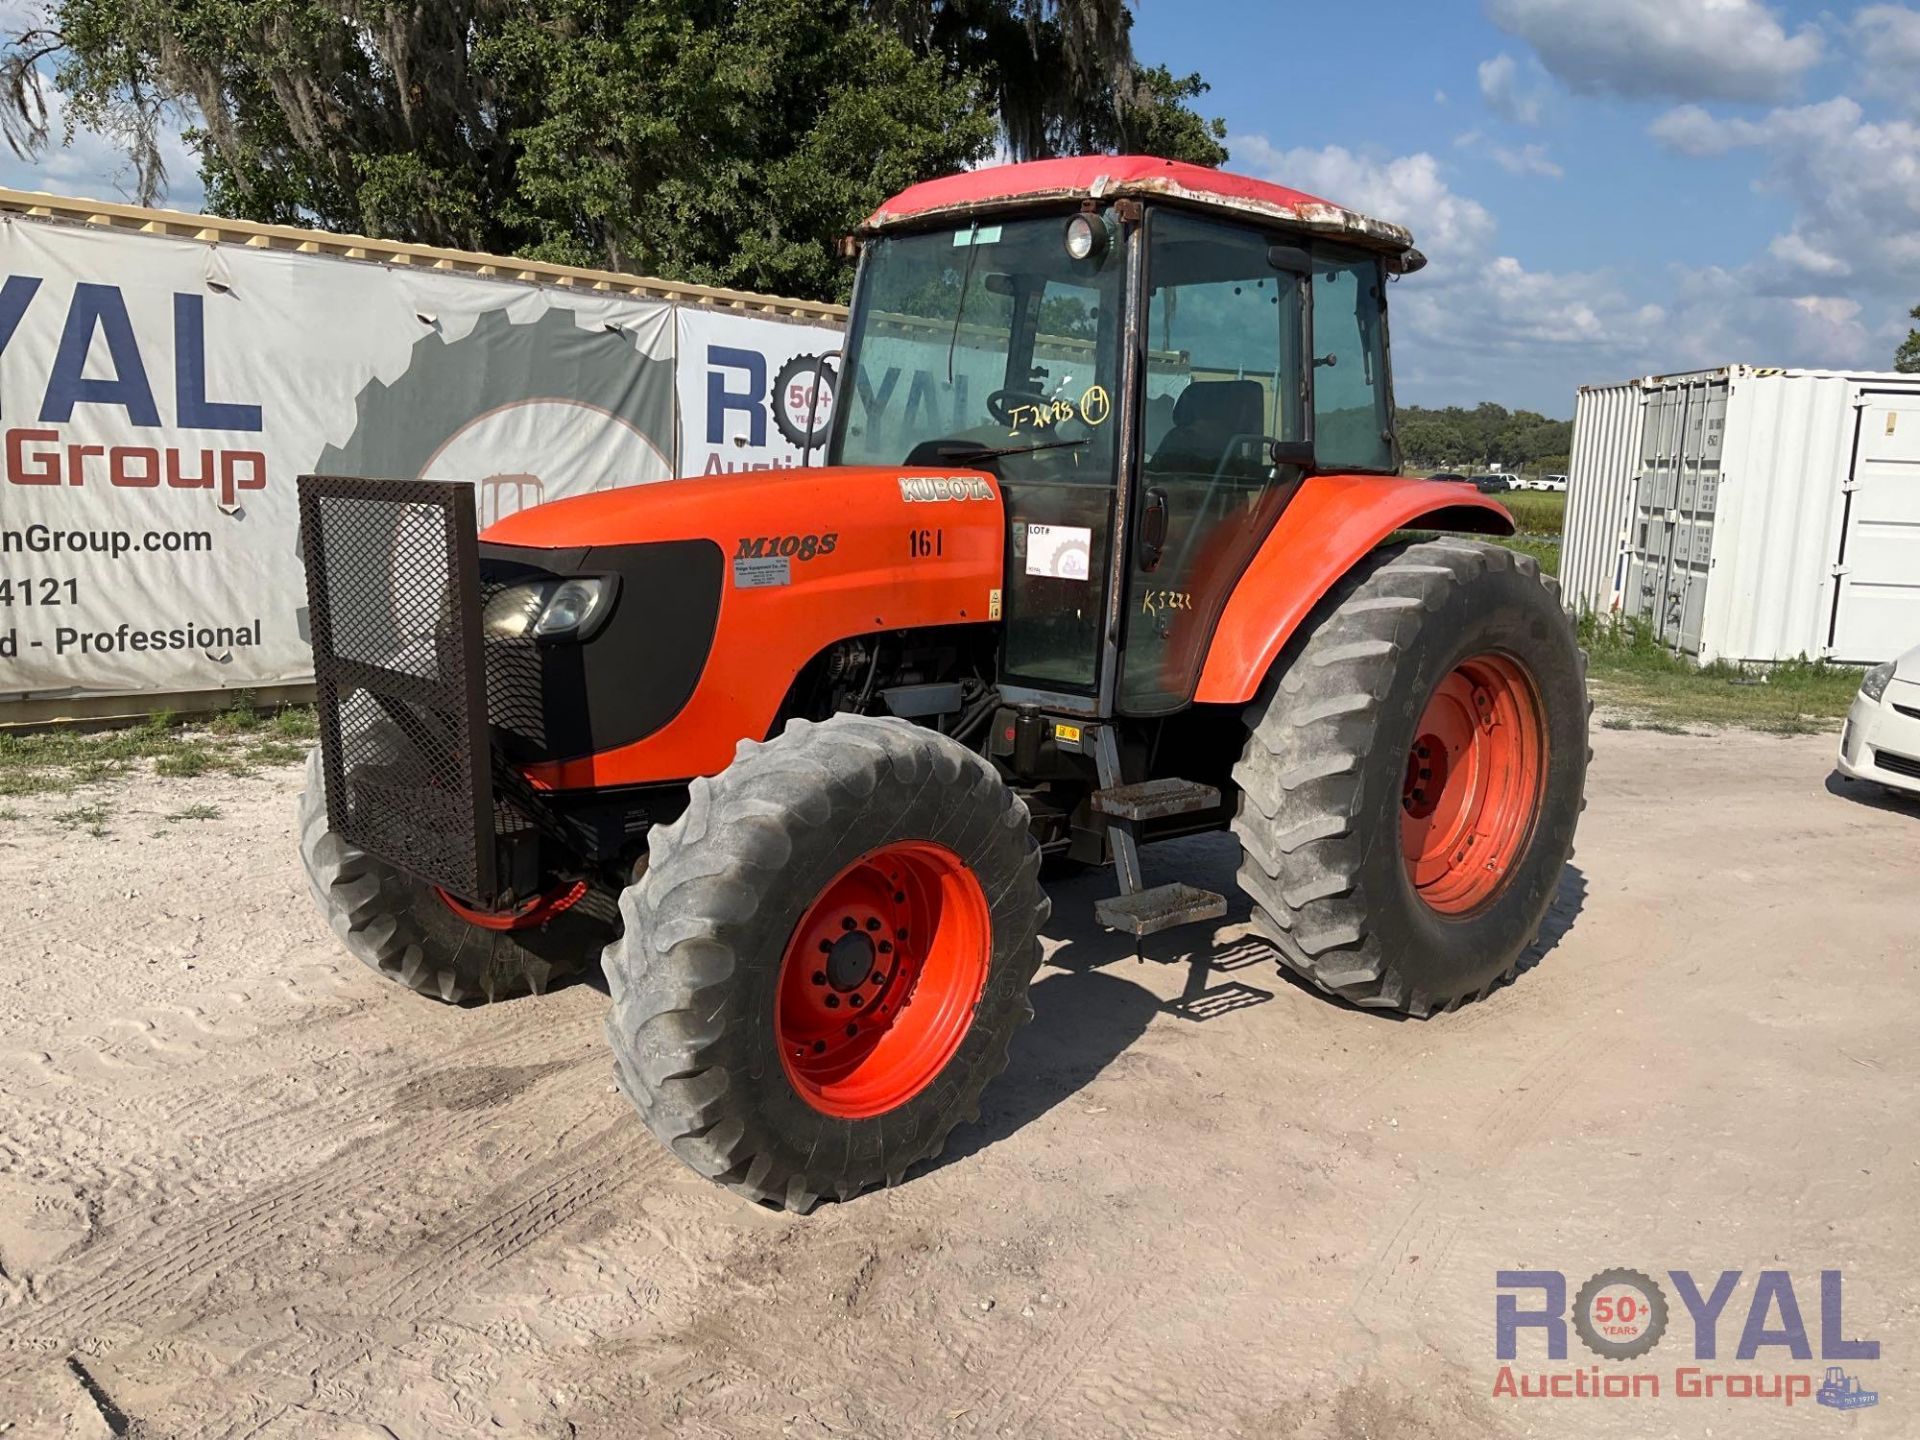 2013 Kubota Tractor M108S 4x4 Agricultural Tractor